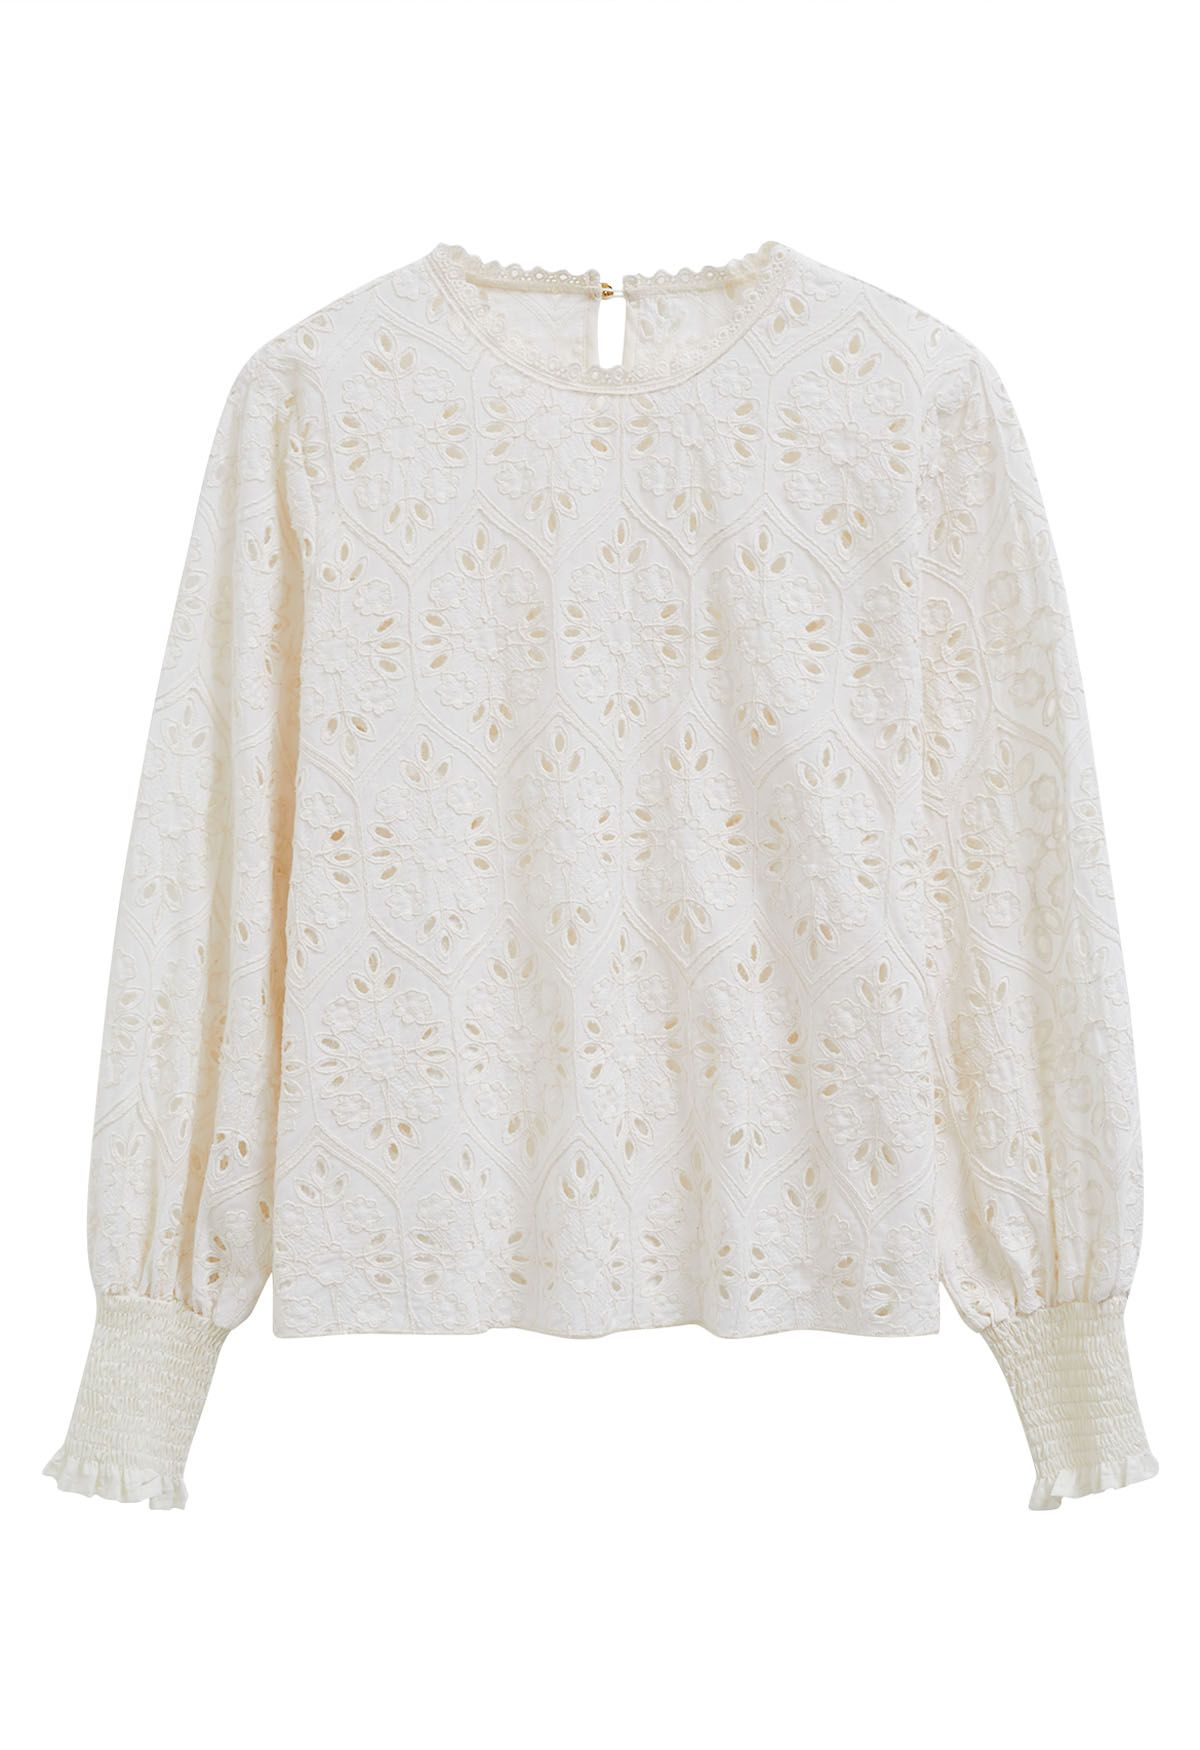 Floral Embroidered Eyelet Dolly Top in Cream - Retro, Indie and Unique ...